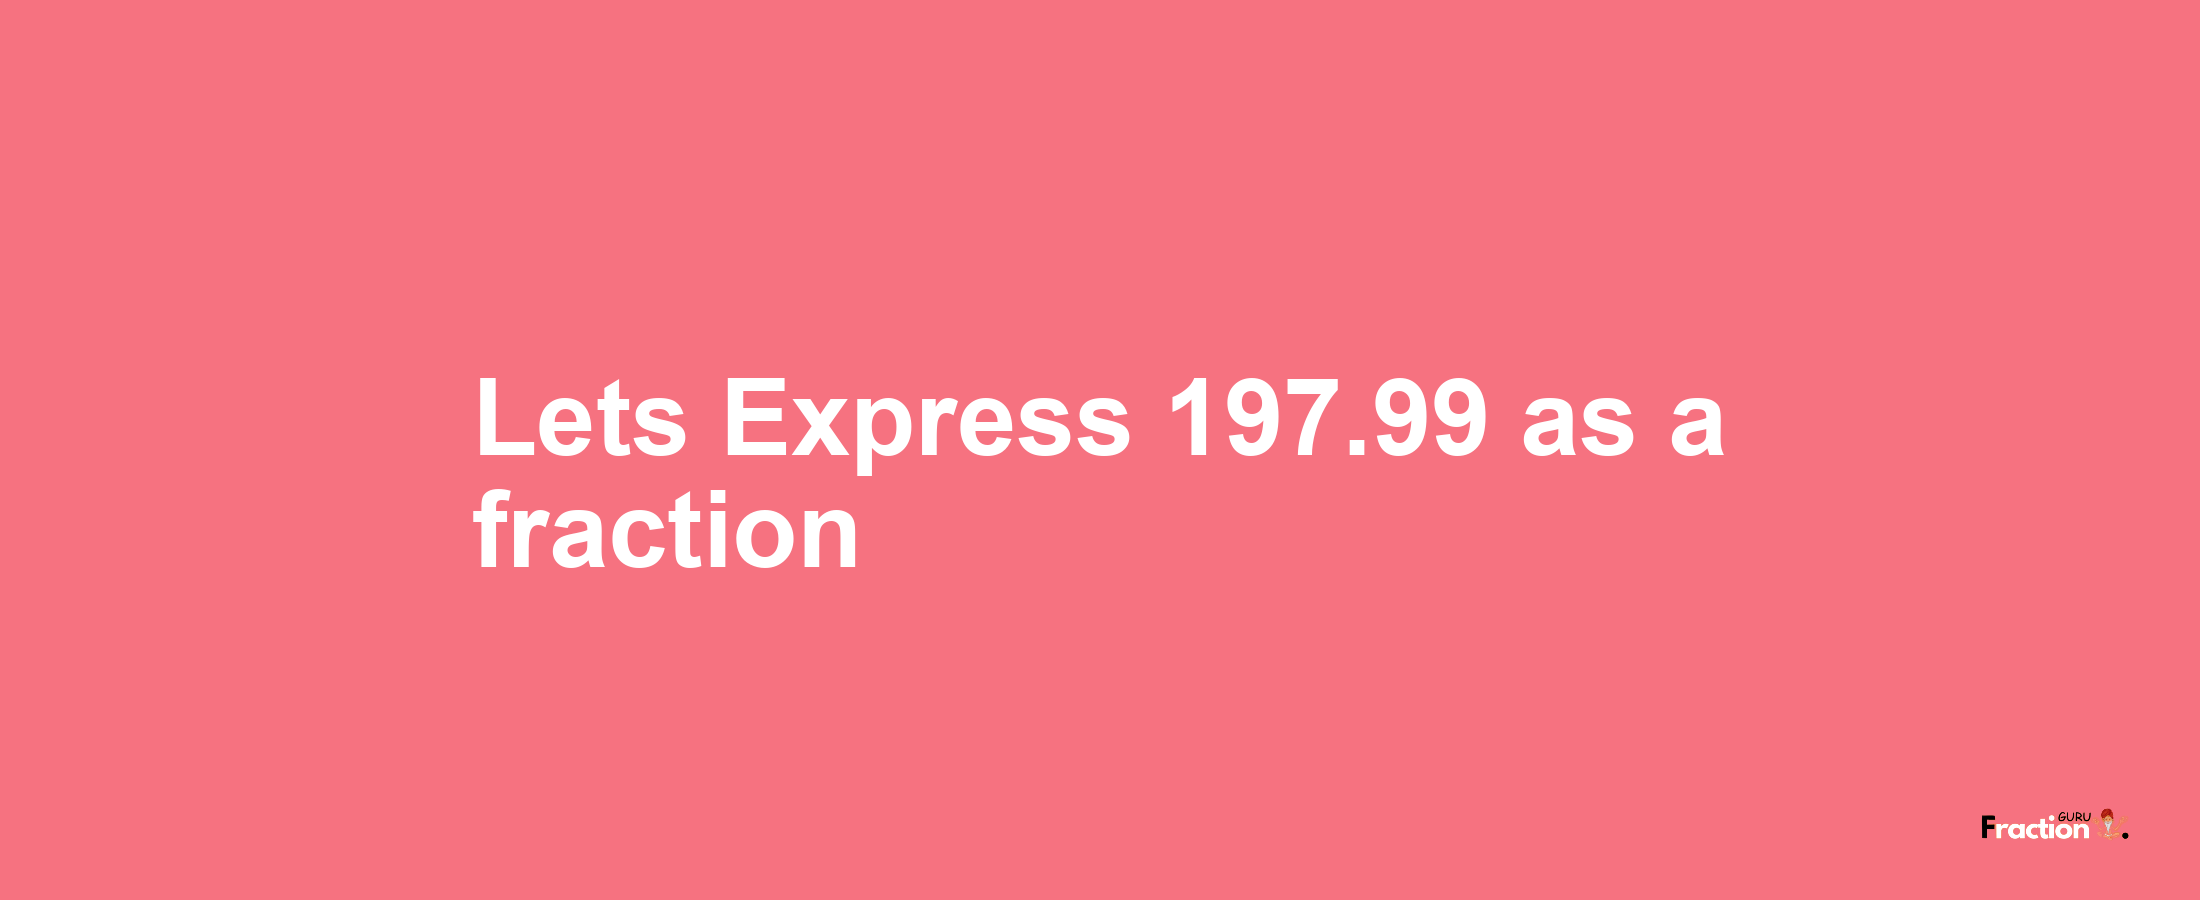 Lets Express 197.99 as afraction